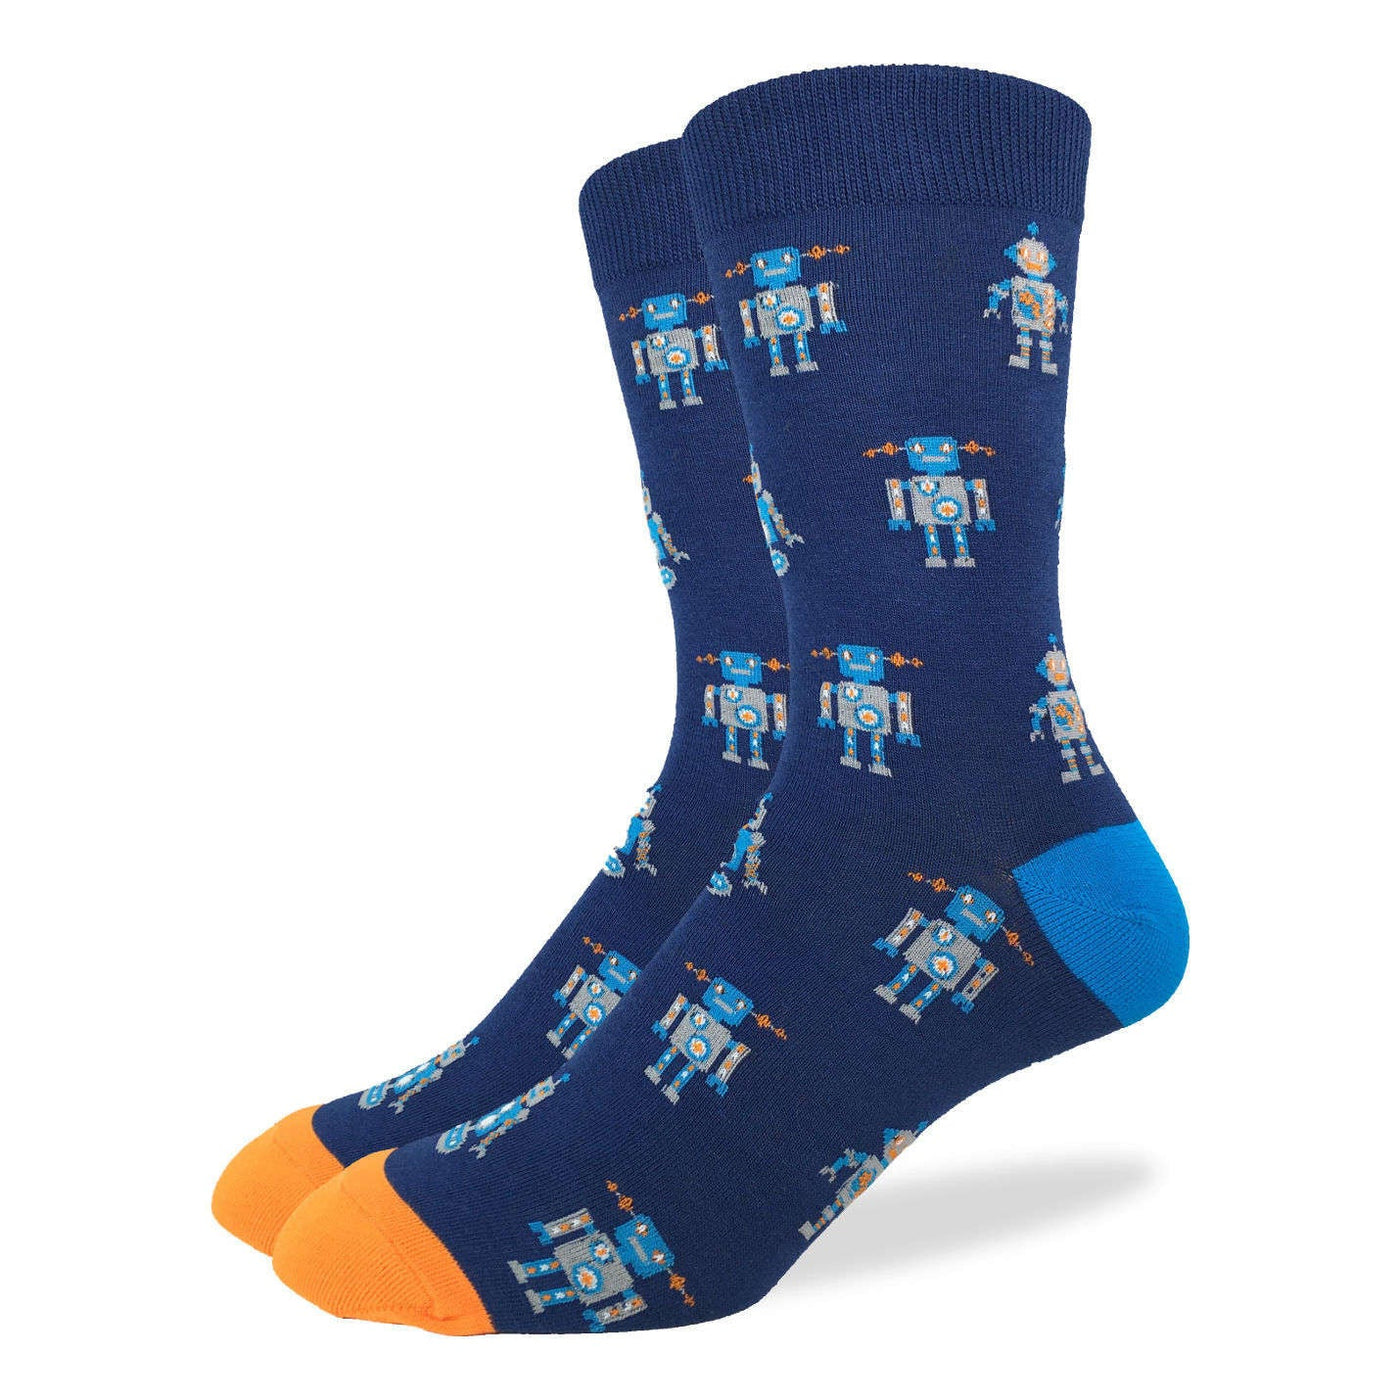 "Navy Robot" Cotton Crew Socks by Good Luck Sock - Large